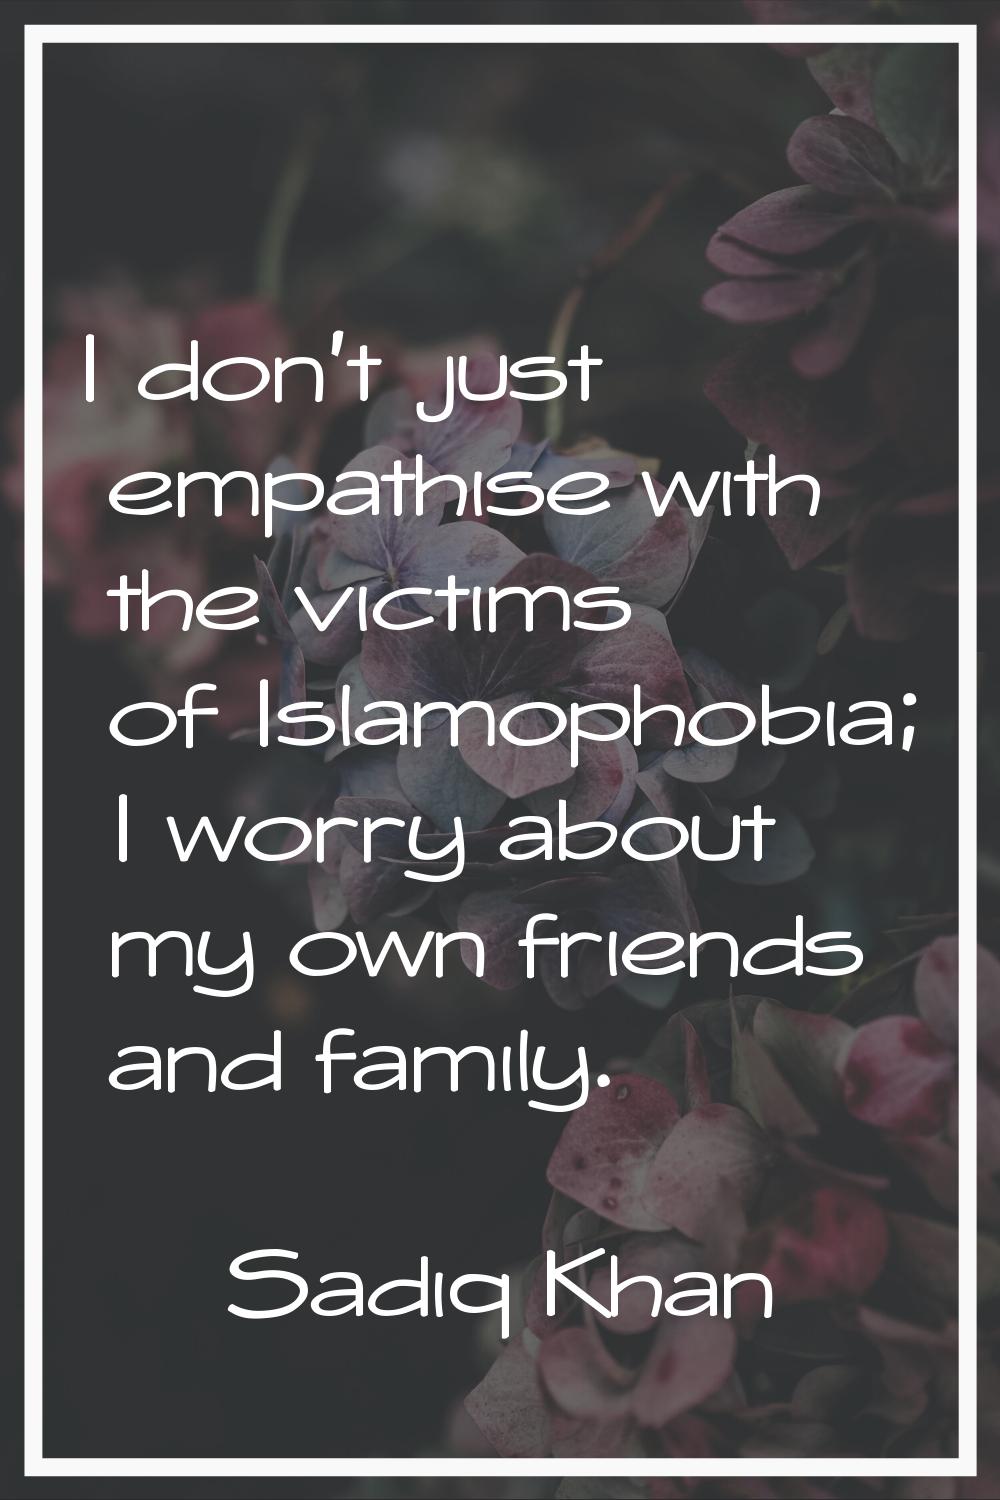 I don't just empathise with the victims of Islamophobia; I worry about my own friends and family.